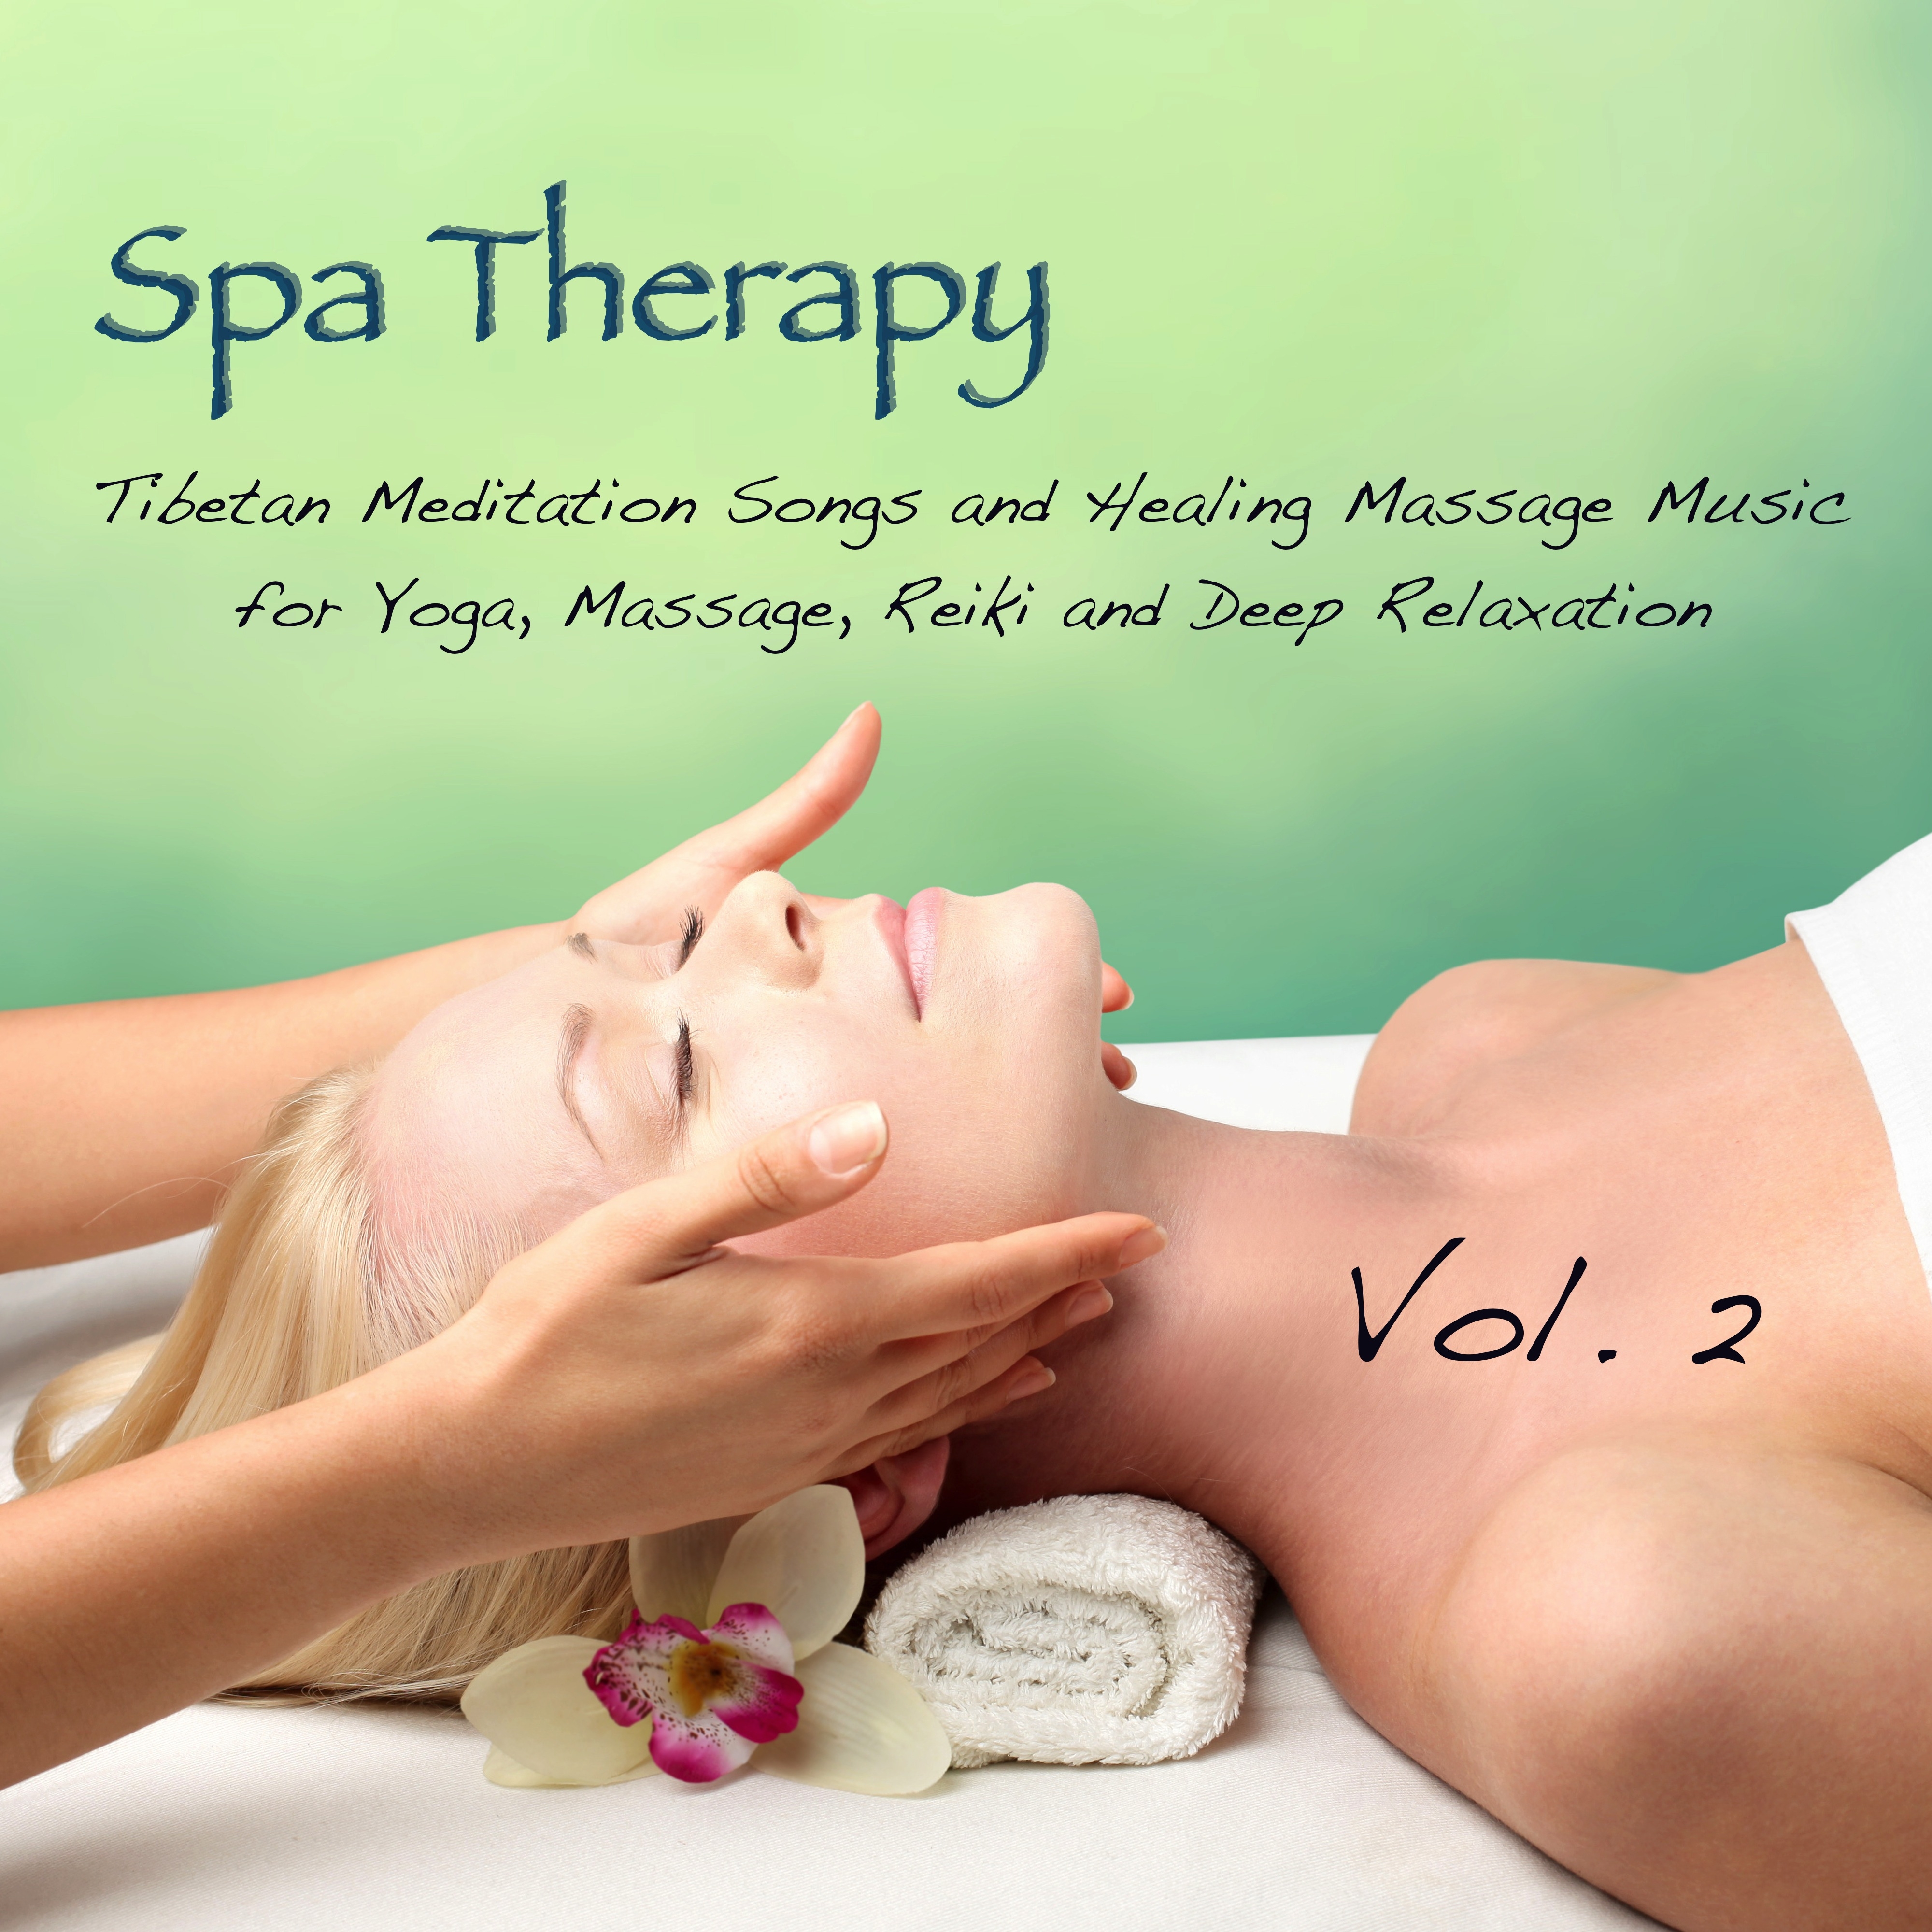 Spa Therapy, Vol. 2 - Tibetan Meditation Songs and Healing Massage Music for Yoga, Massage, Reiki and Deep Relaxation